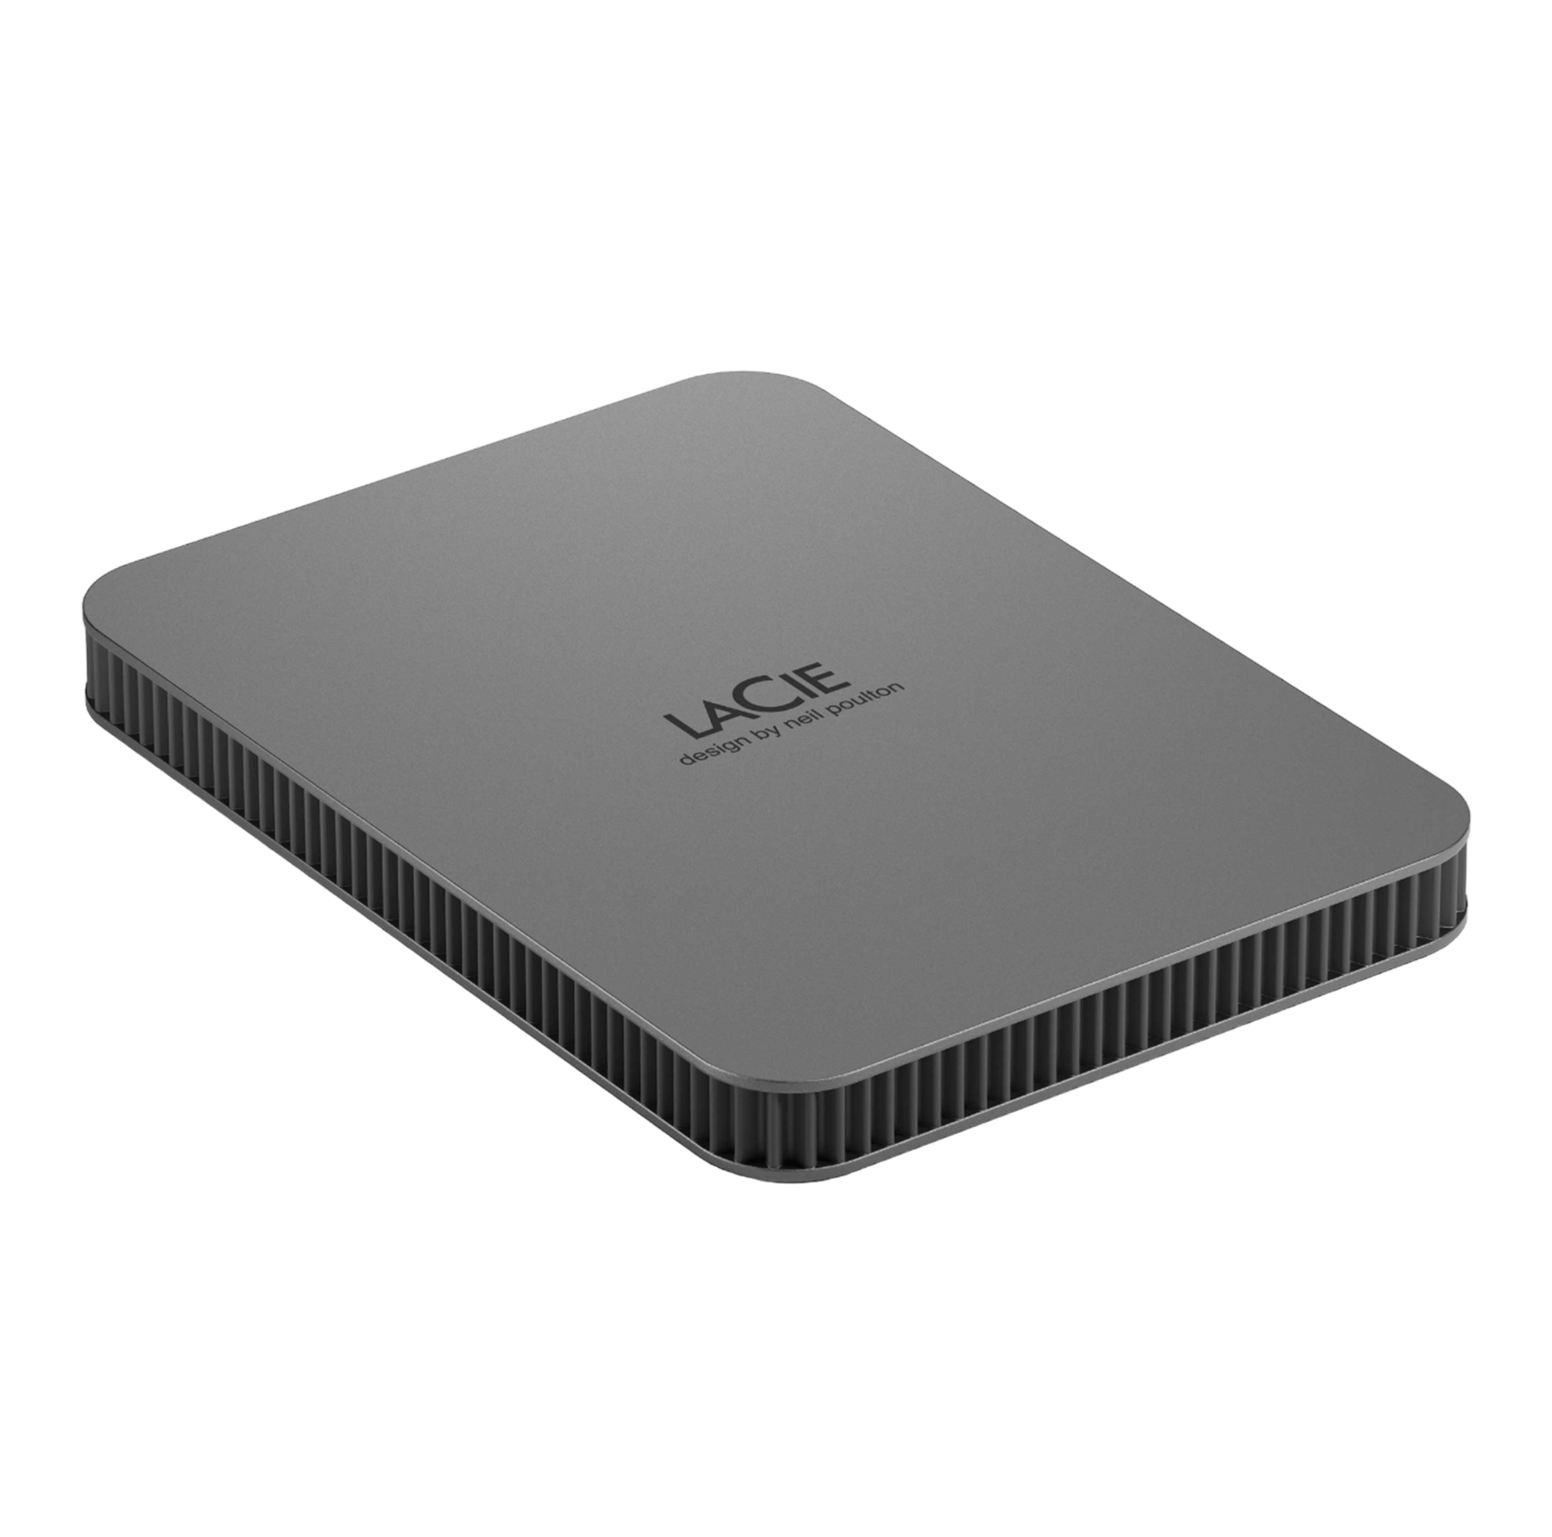 LaCie 2TB Mobile Drive Secure - Space Grey - Discontinued